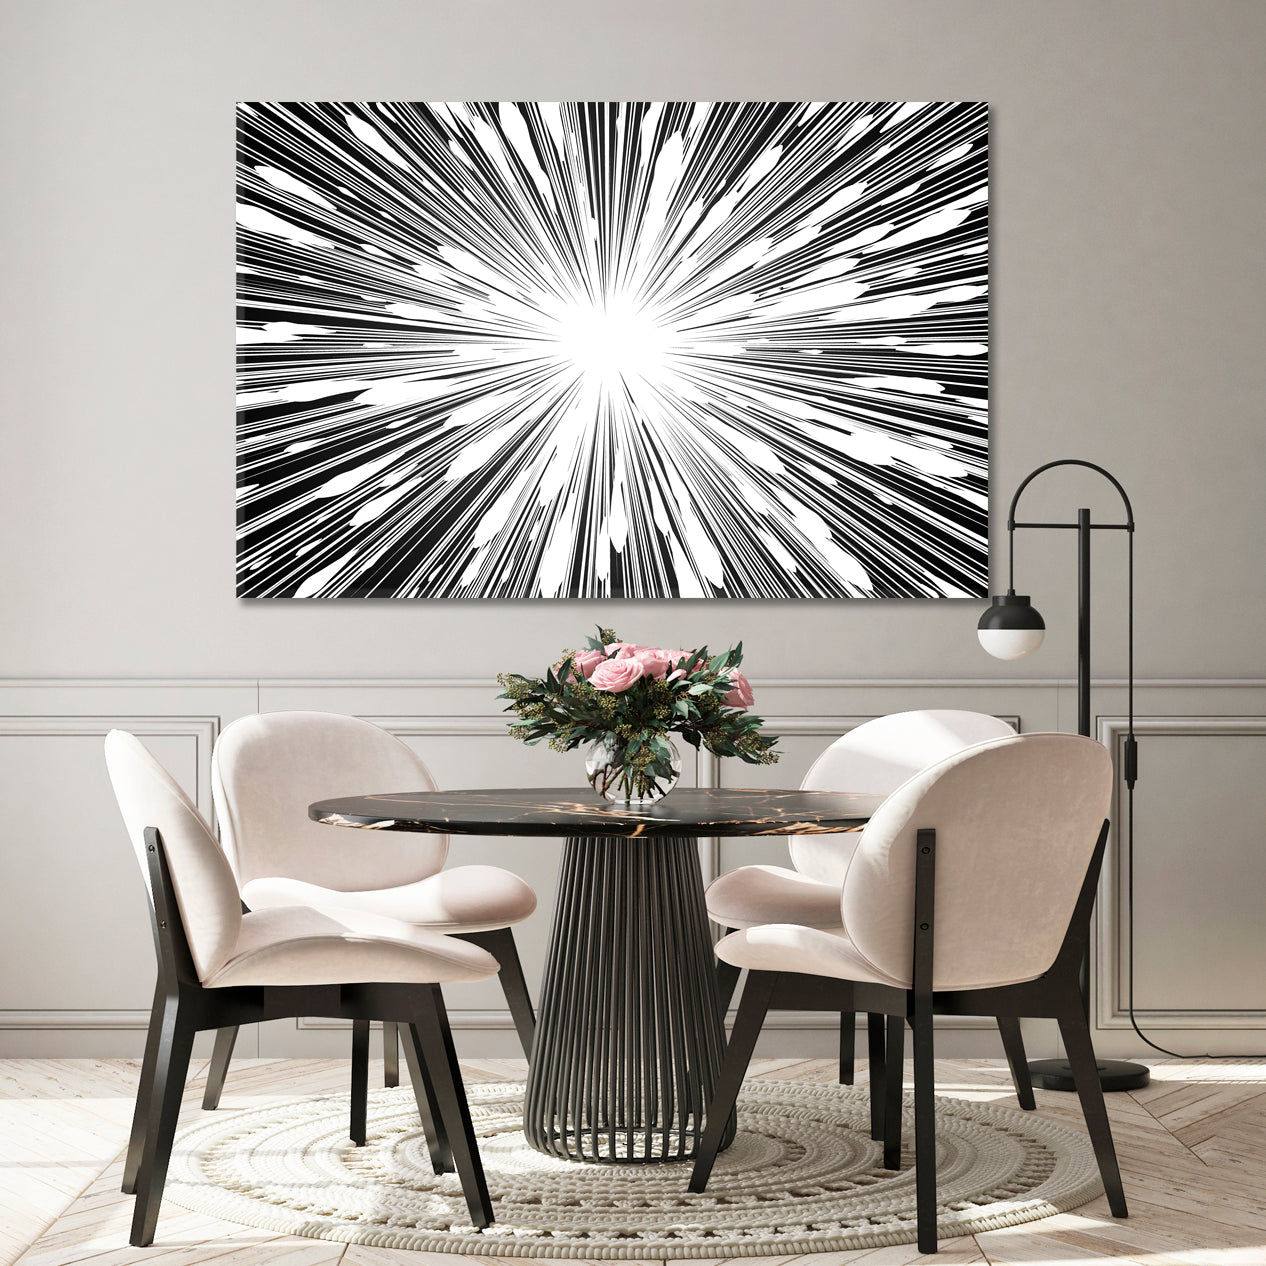 LIGHT RAYS Abstract Black and White Radial Lines Explosion Sun Ray Starburst Canvas Print Abstract Art Print Artesty 1 panel 24" x 16" 